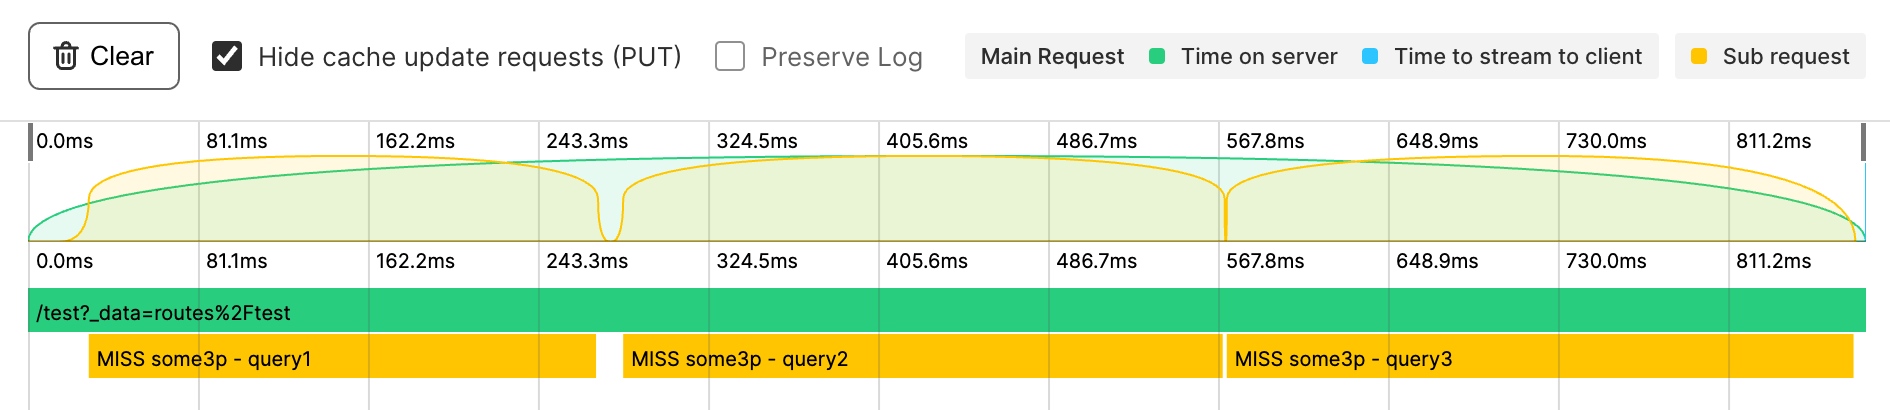 Chart example for request waterfall performance issue